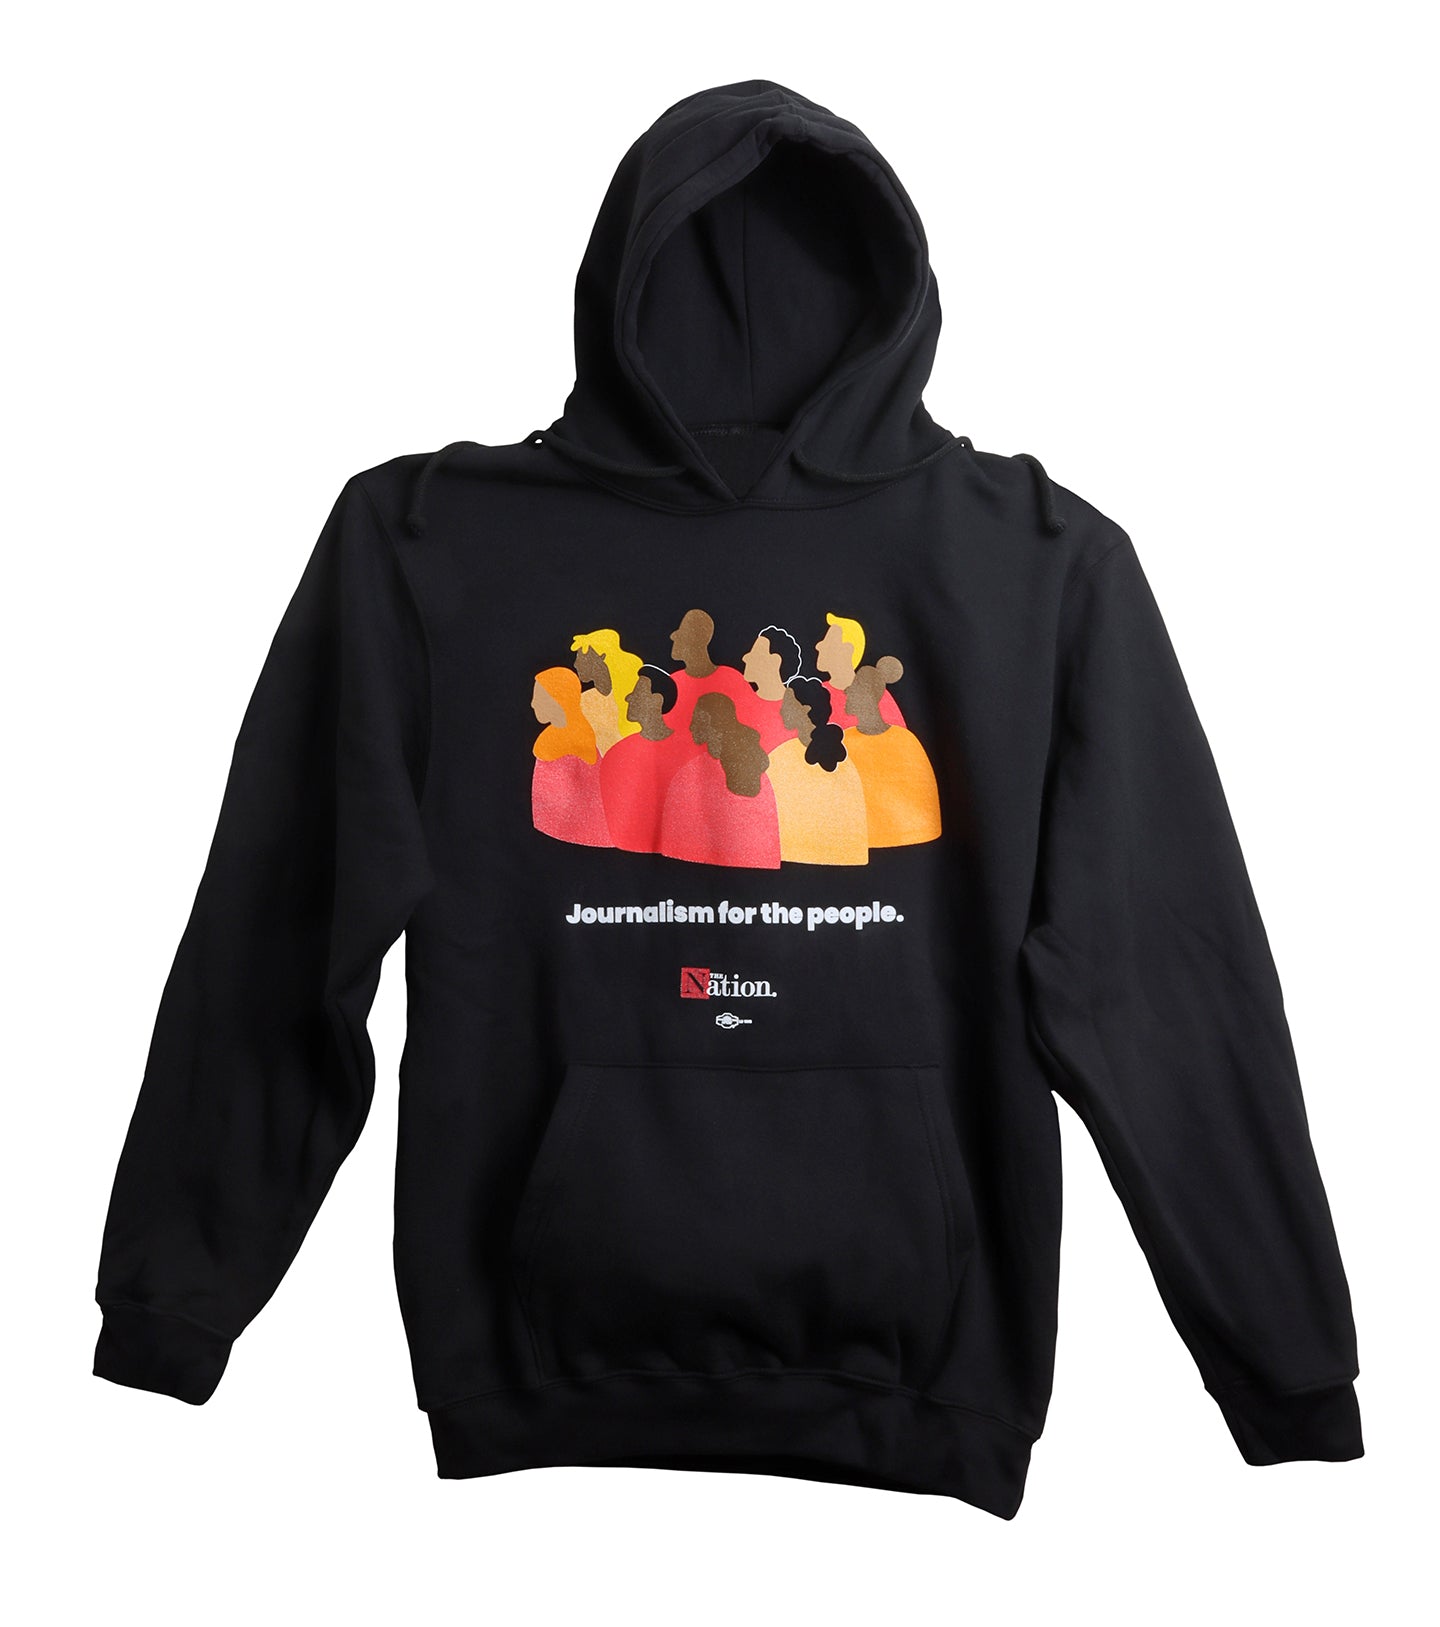 Nation Hoodies (Journalism for the People)